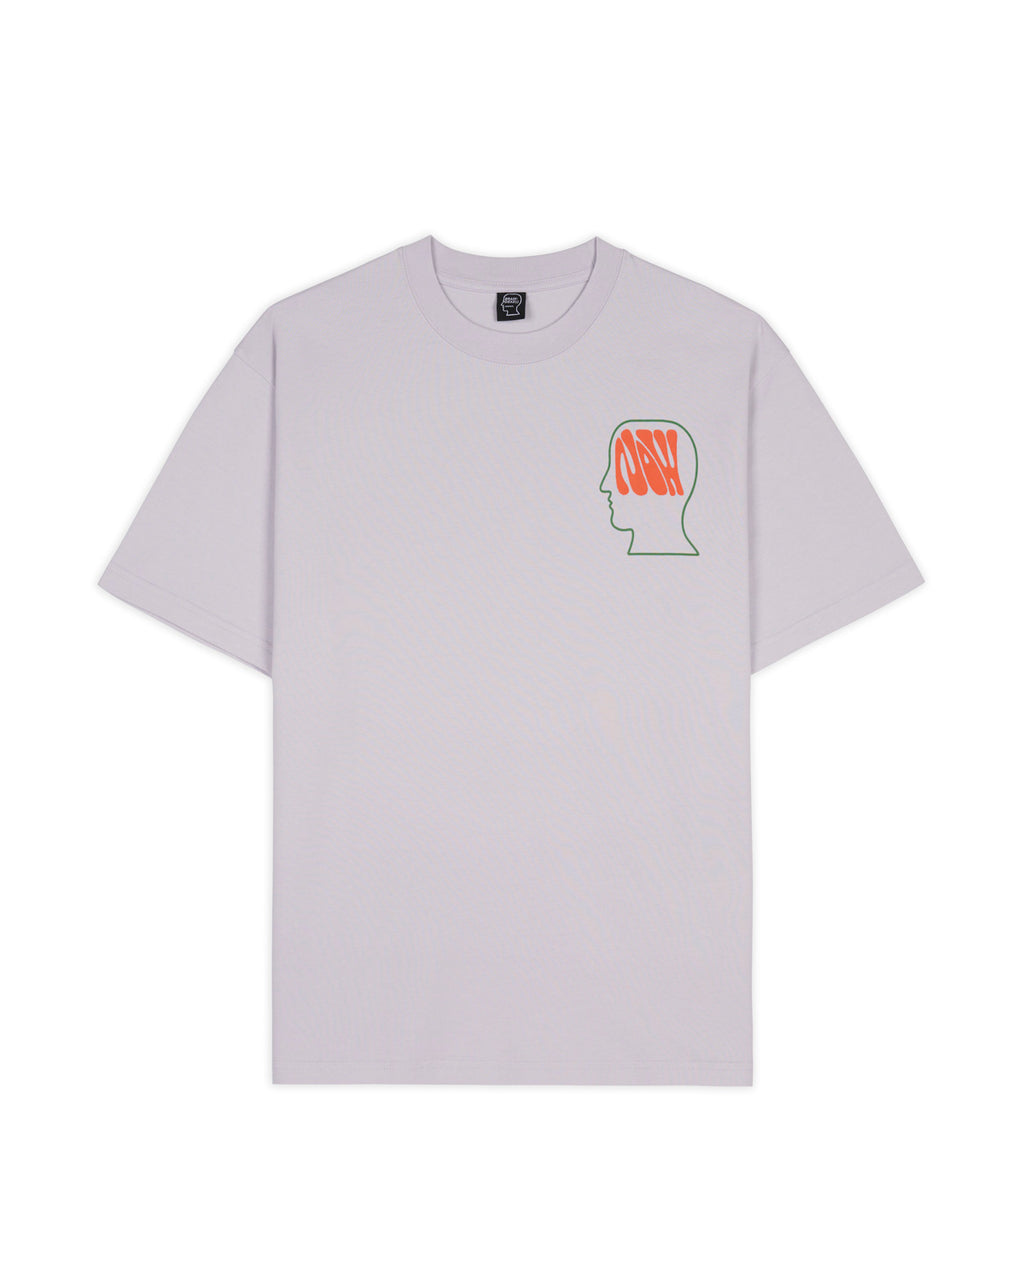 The Now Movement T-shirt - Lilac